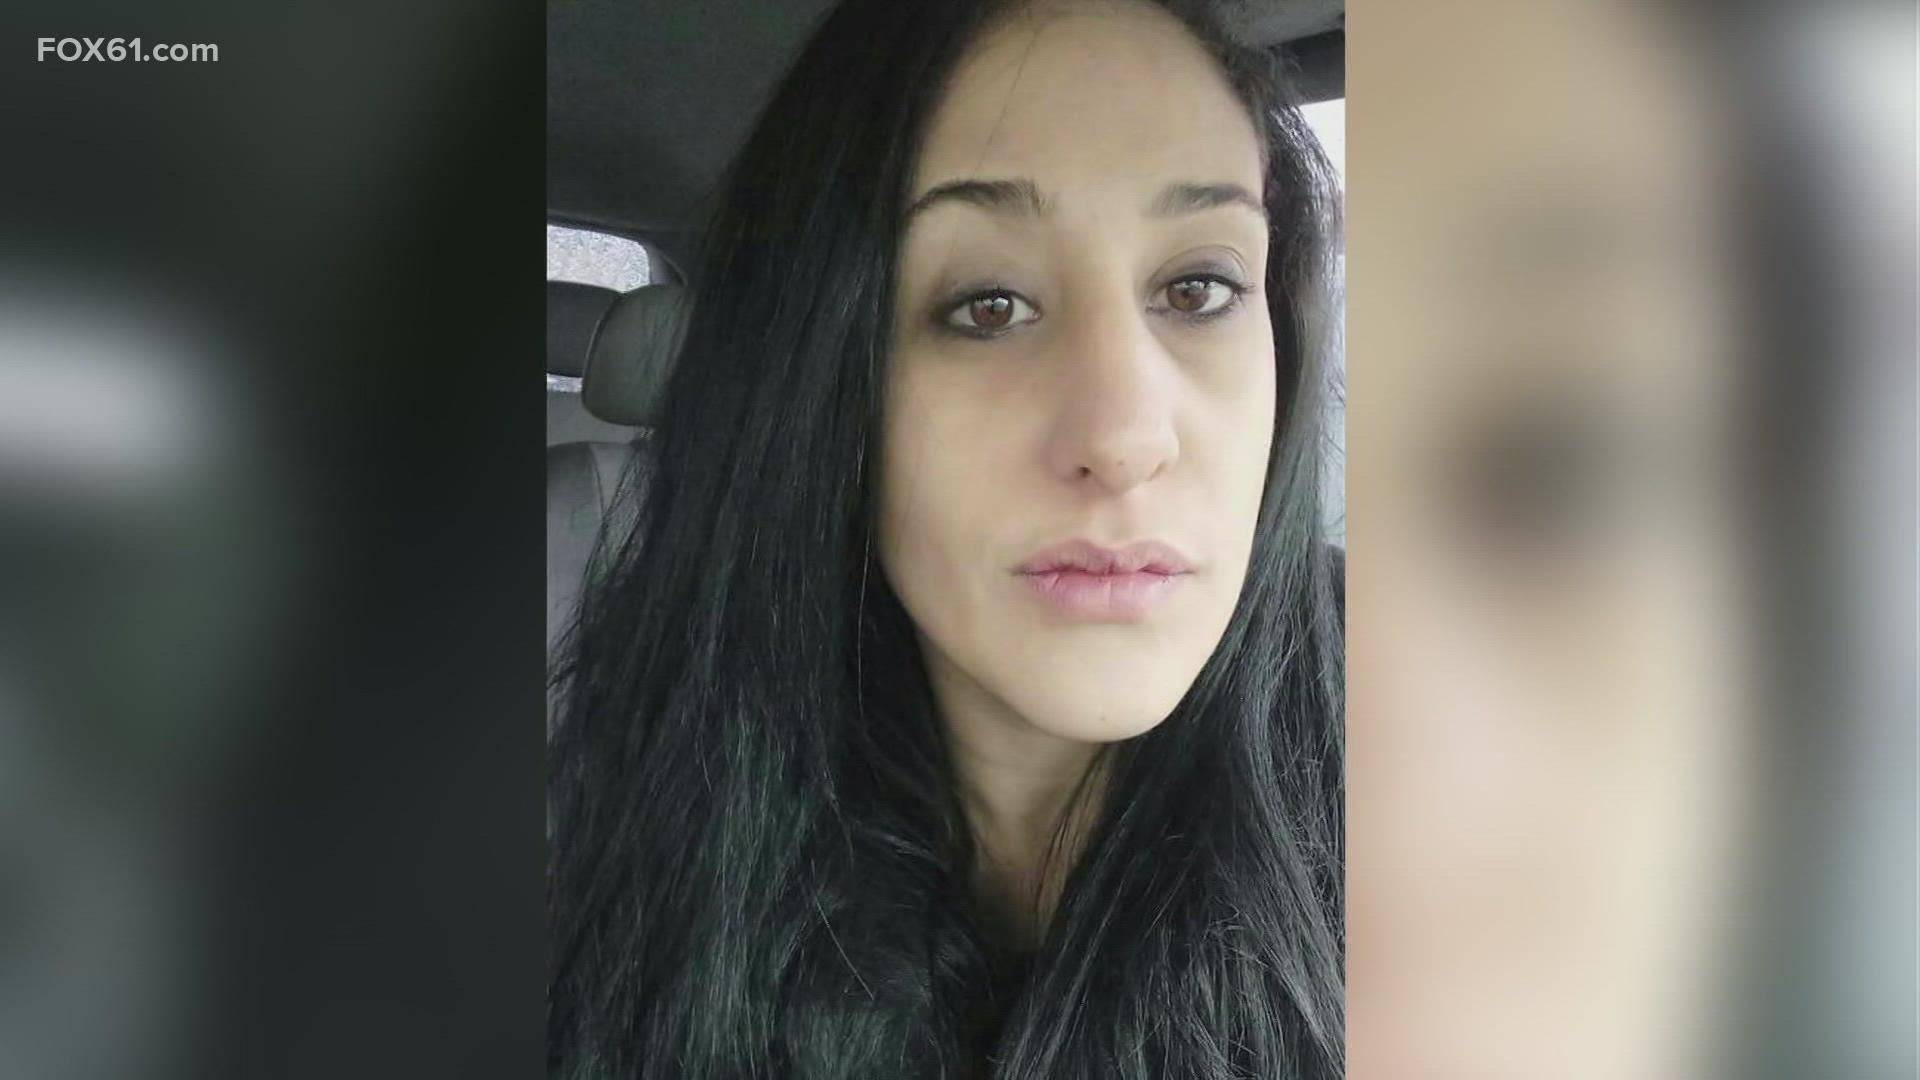 26-year-old Kelsey Mazzamaro was found dead in Burlington. The State is now offering a $50,000 reward for help making an arrest and conviction in the case.